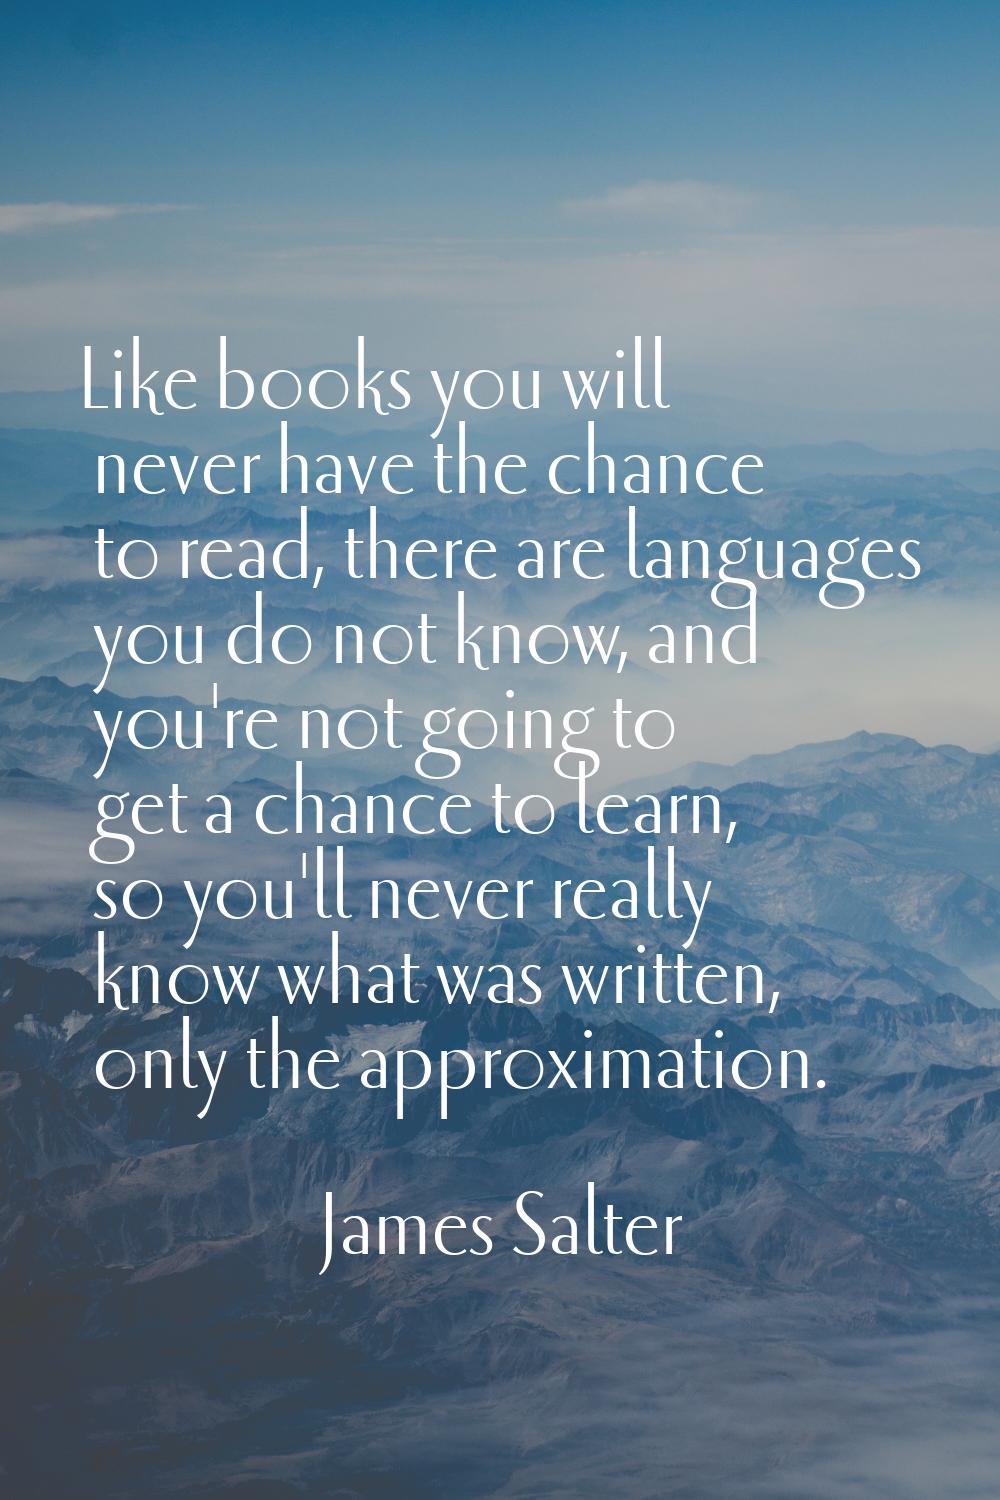 Like books you will never have the chance to read, there are languages you do not know, and you're 